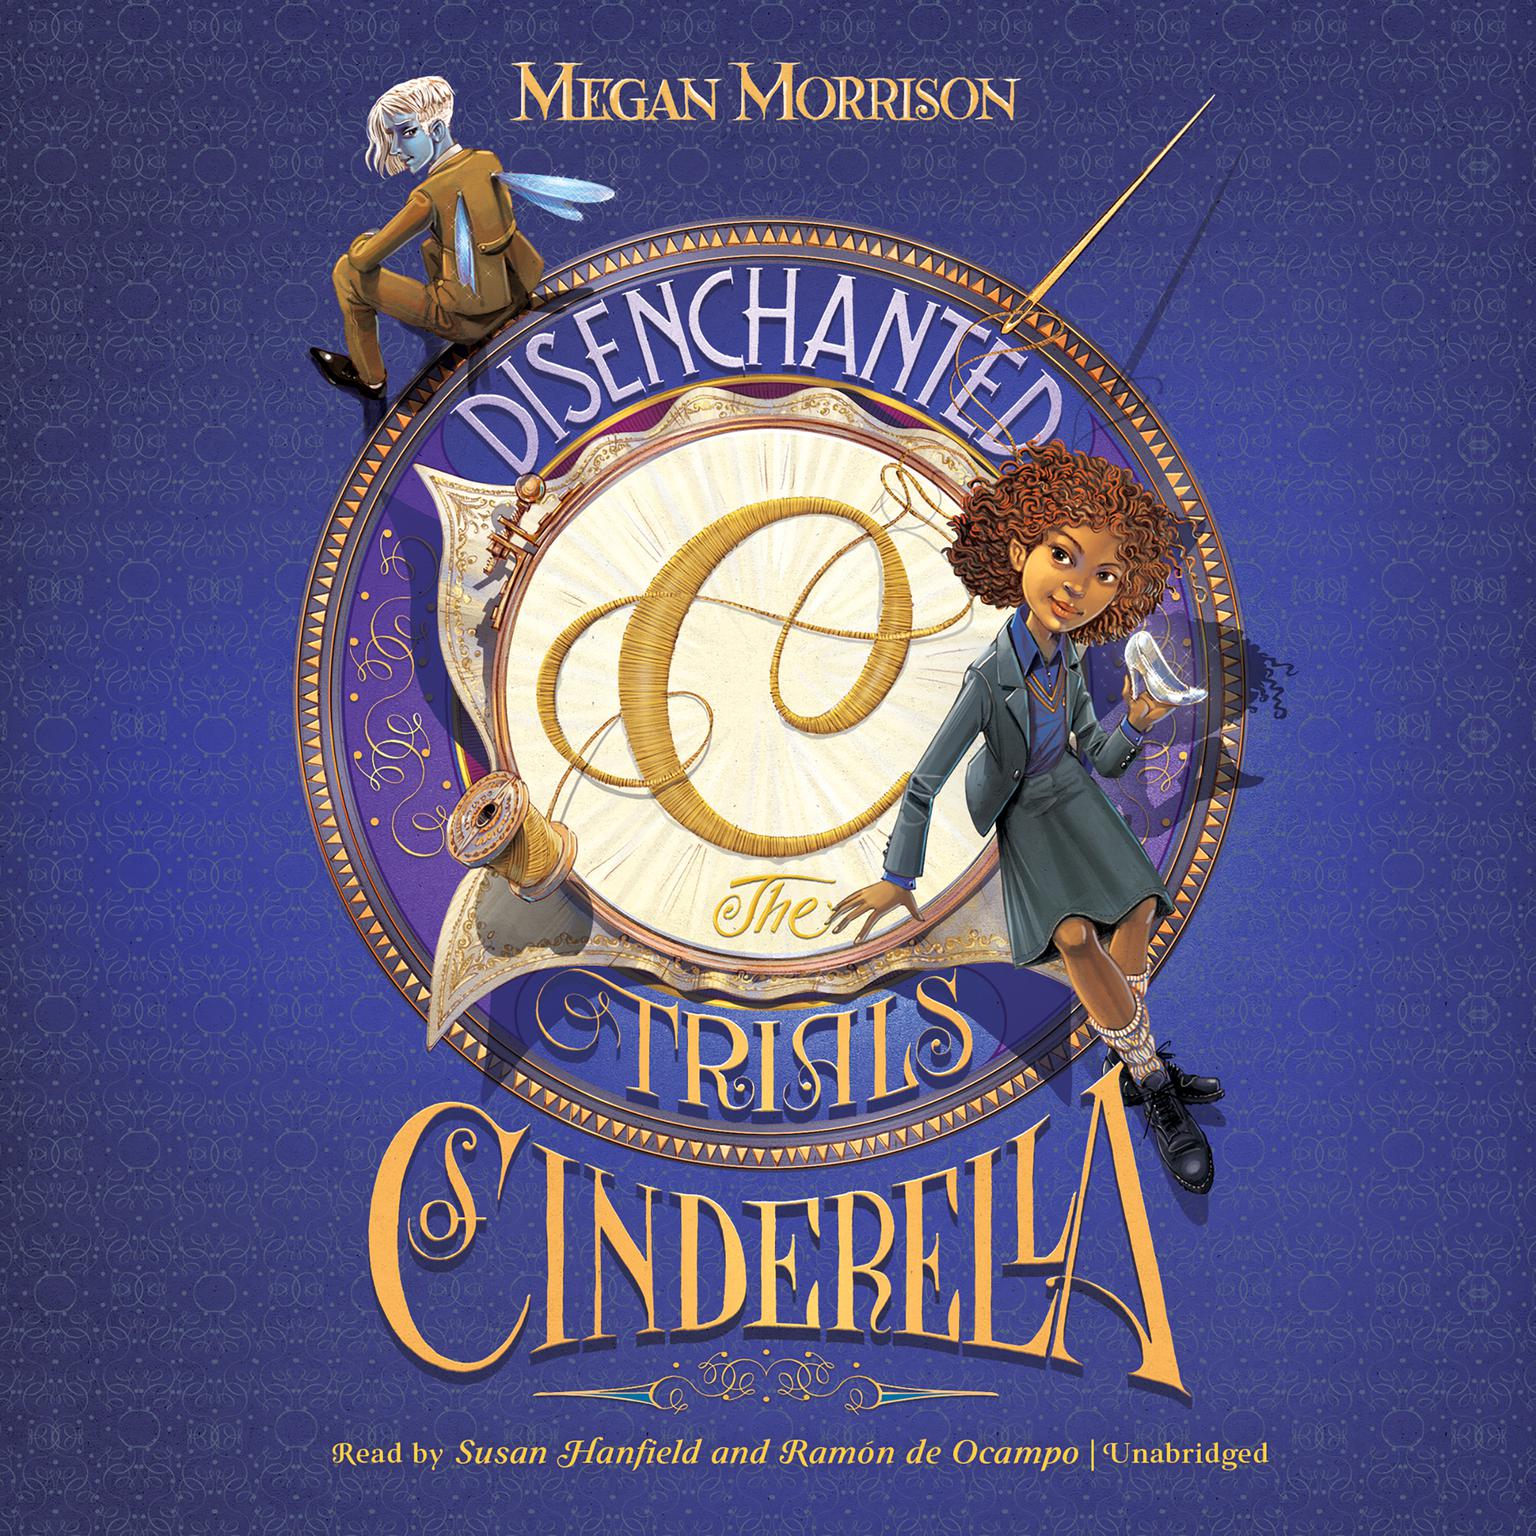 Disenchanted: The Trials of Cinderella Audiobook, by Megan Morrison